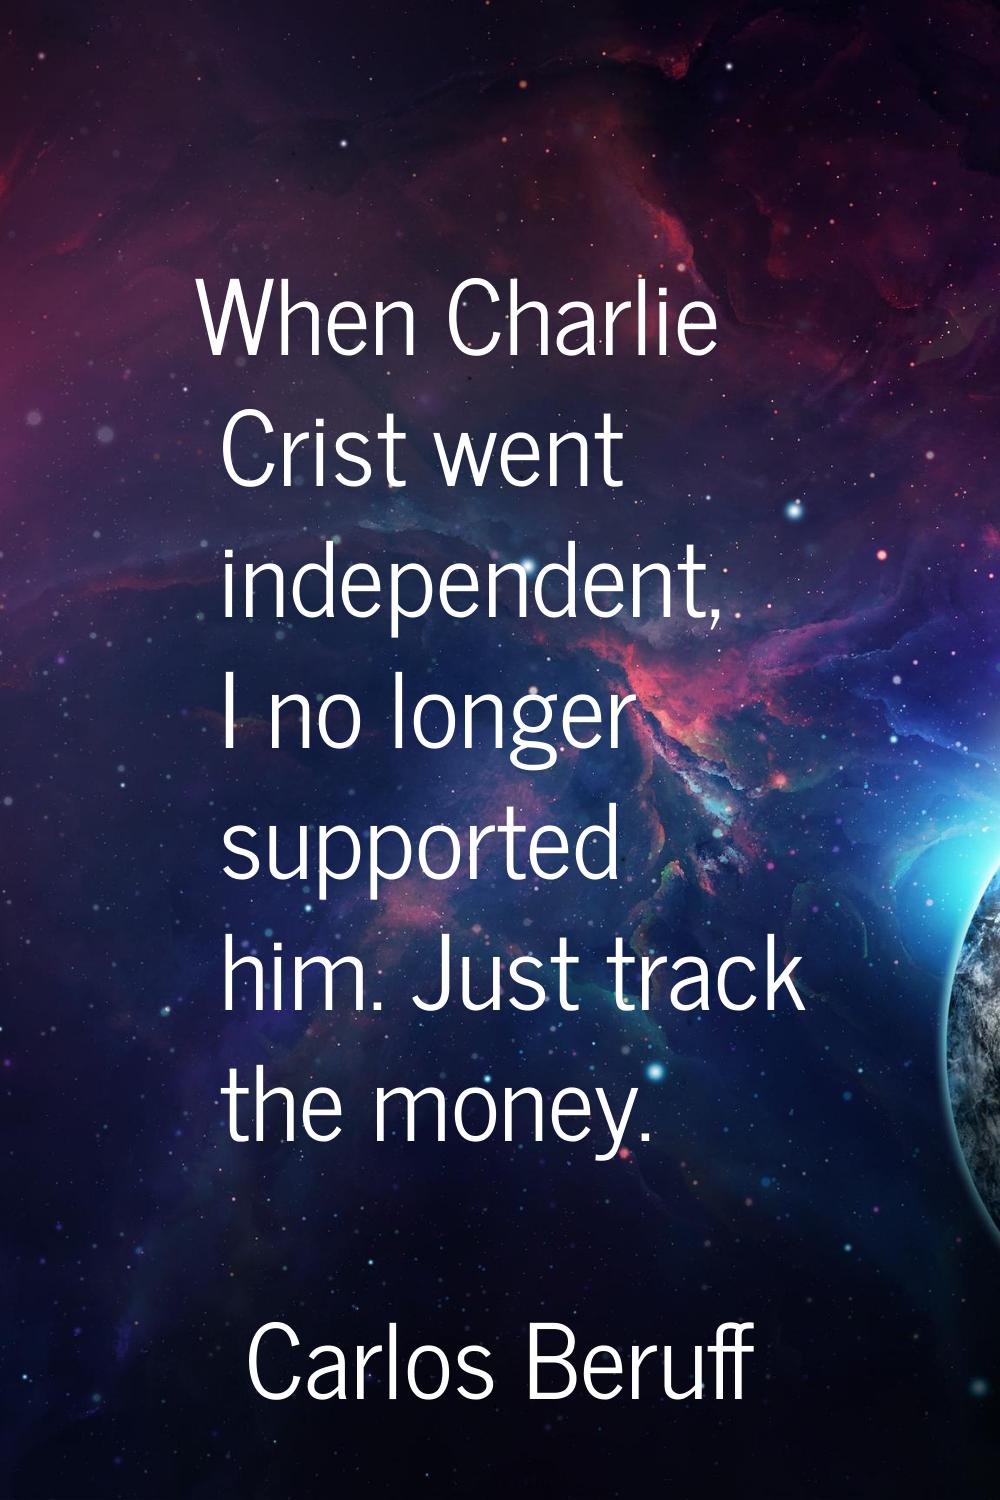 When Charlie Crist went independent, I no longer supported him. Just track the money.